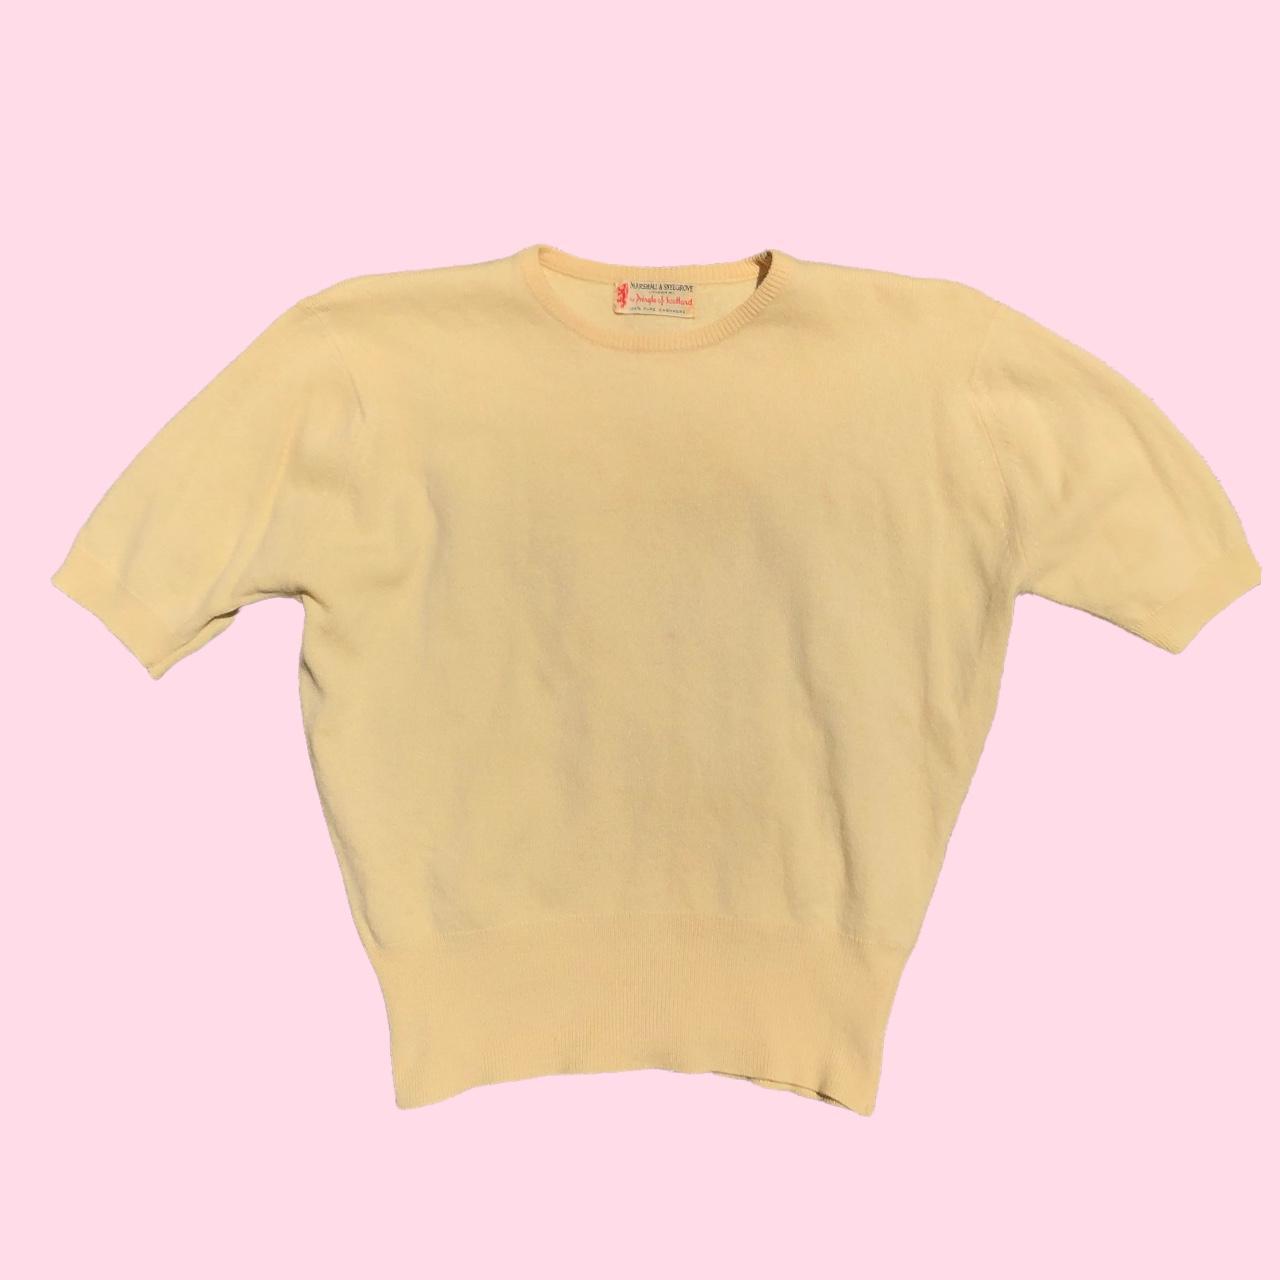 Product Image 1 - Vintage 1950s Yellow Cashmere Top